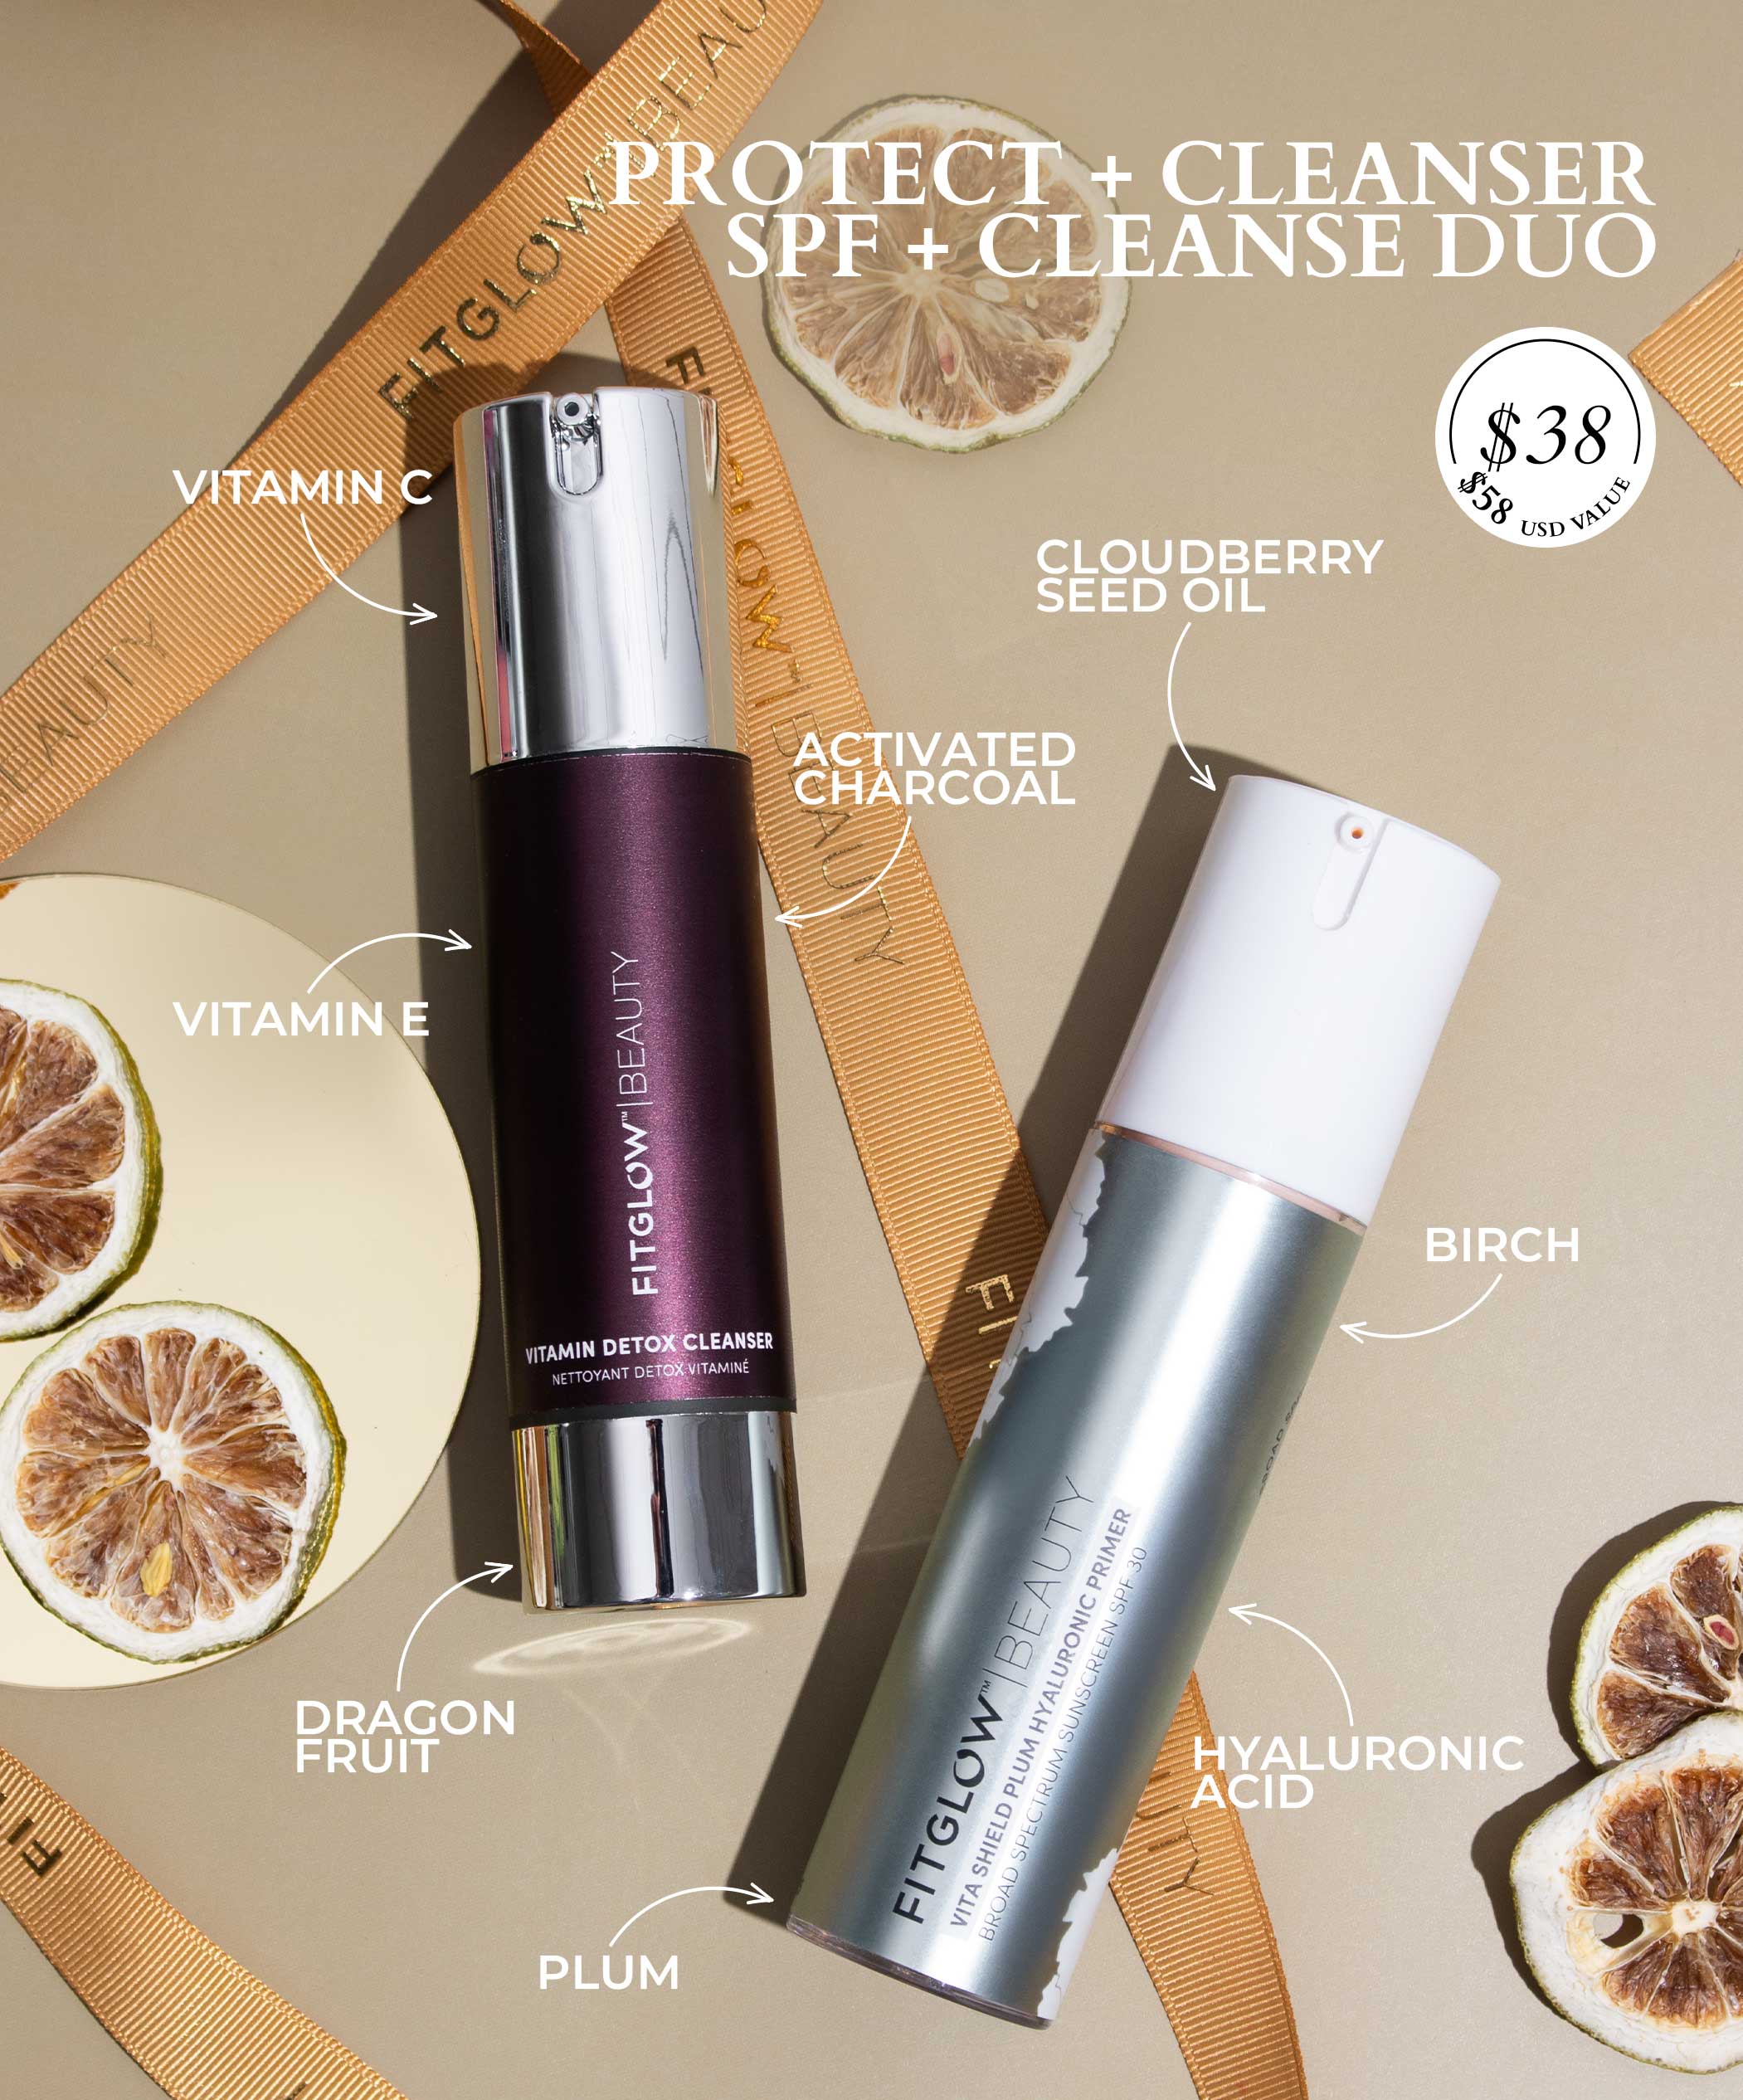 Protect + Cleanse SPF and Cleanse Duo